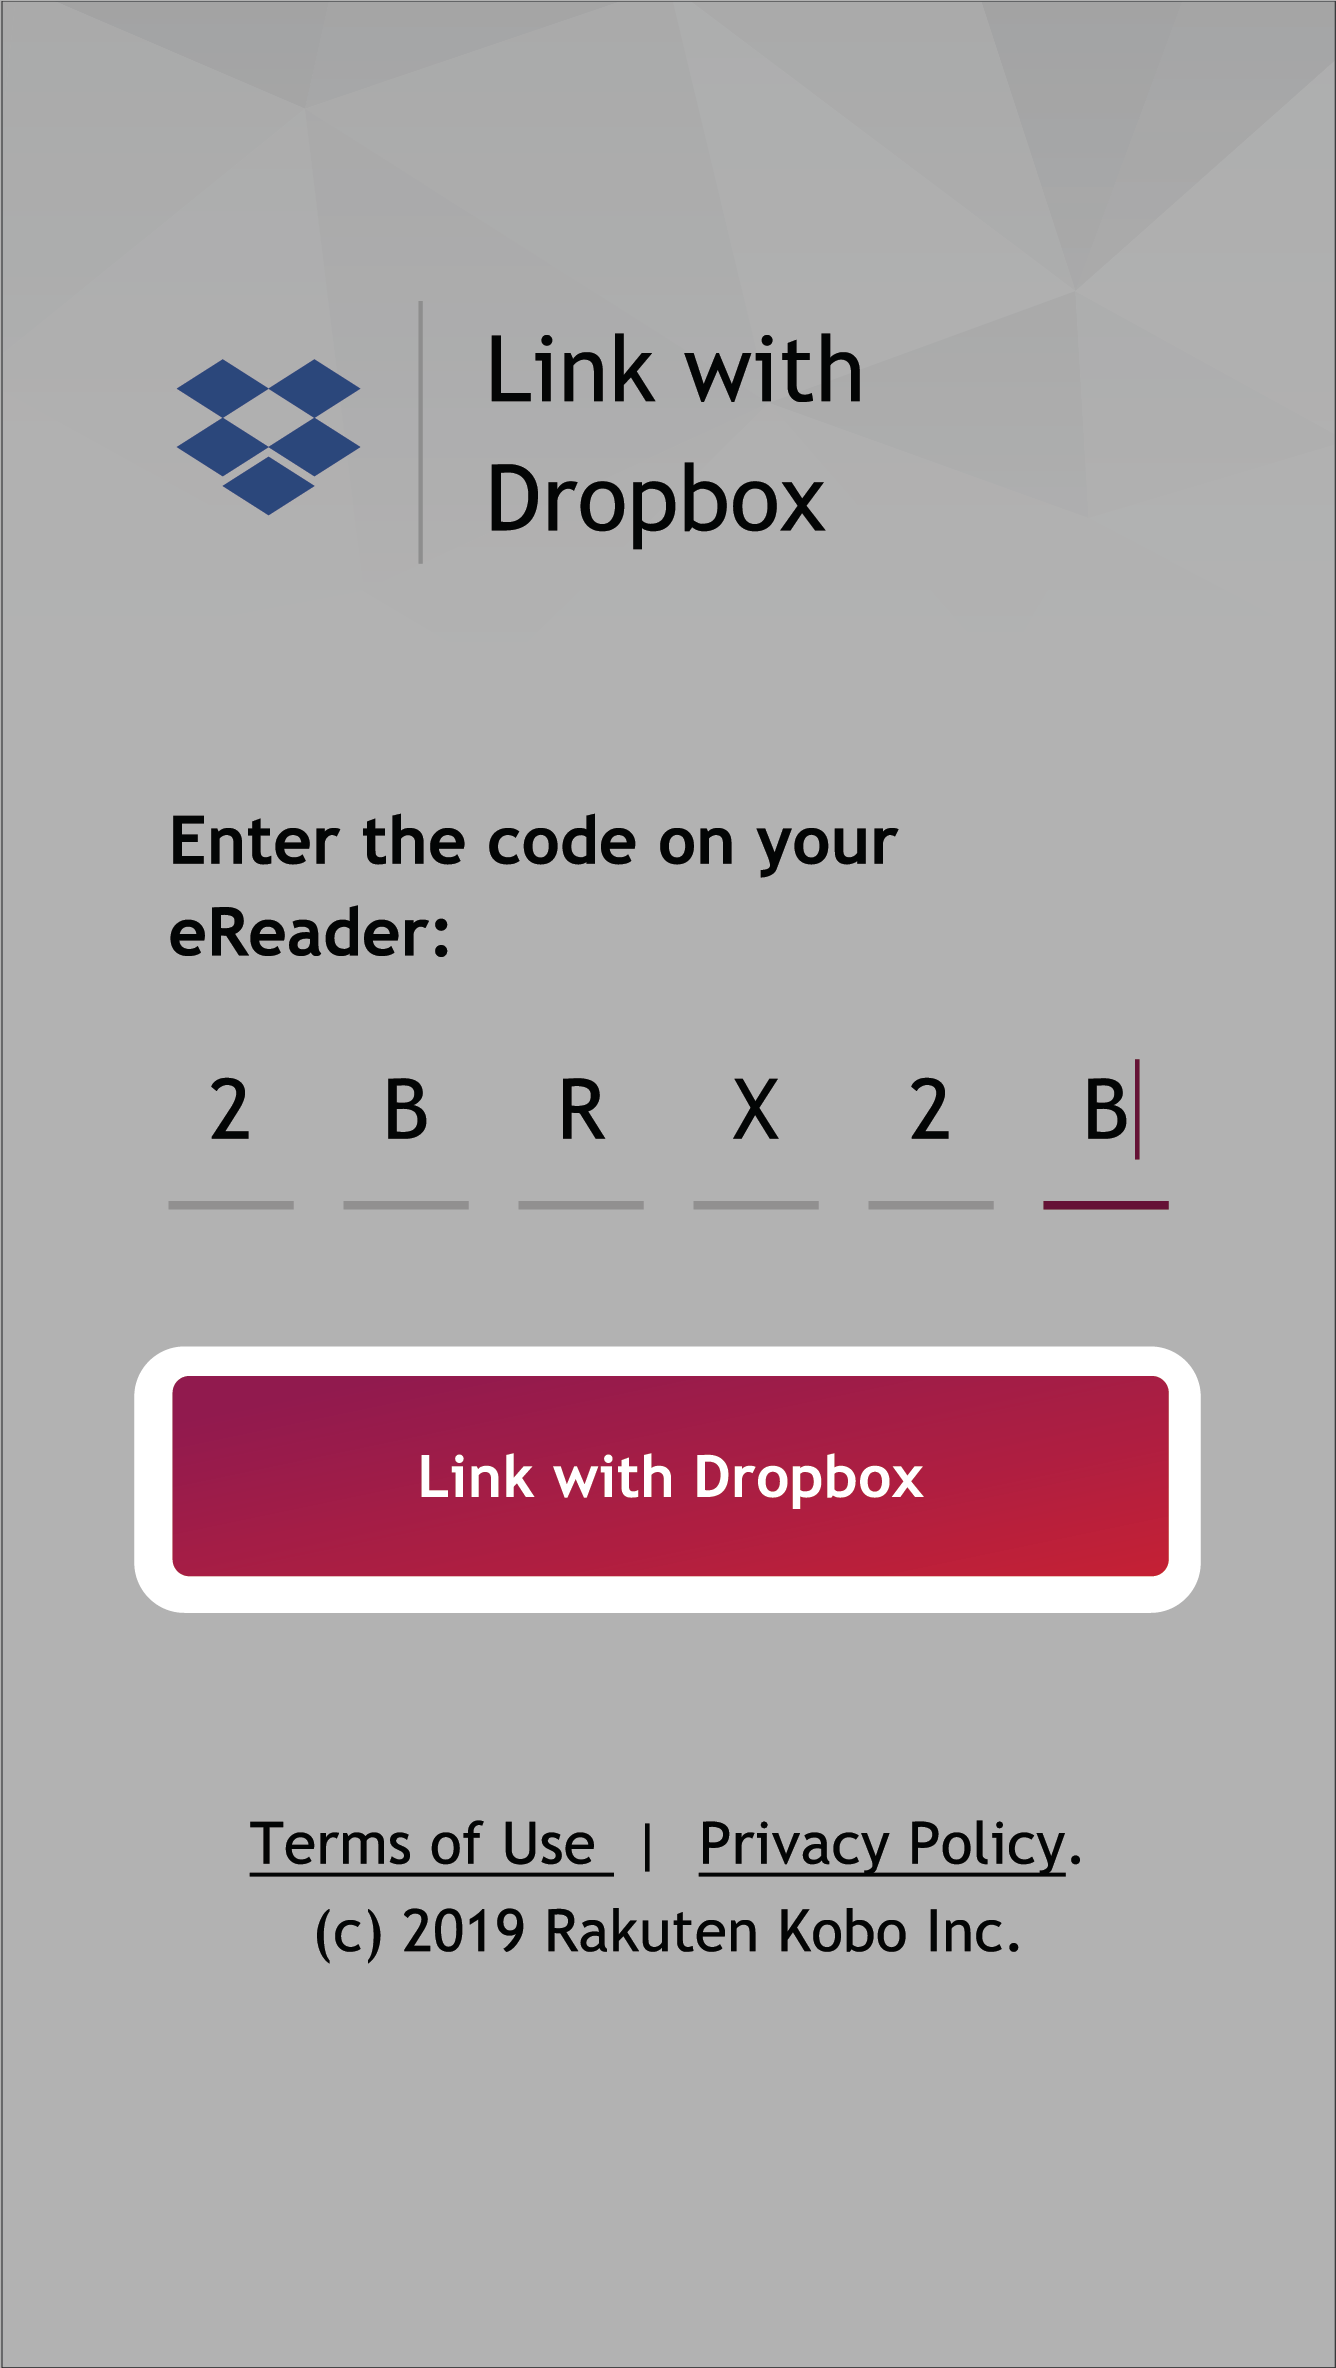 link_with_dropbox_-_phone-callout-01.png